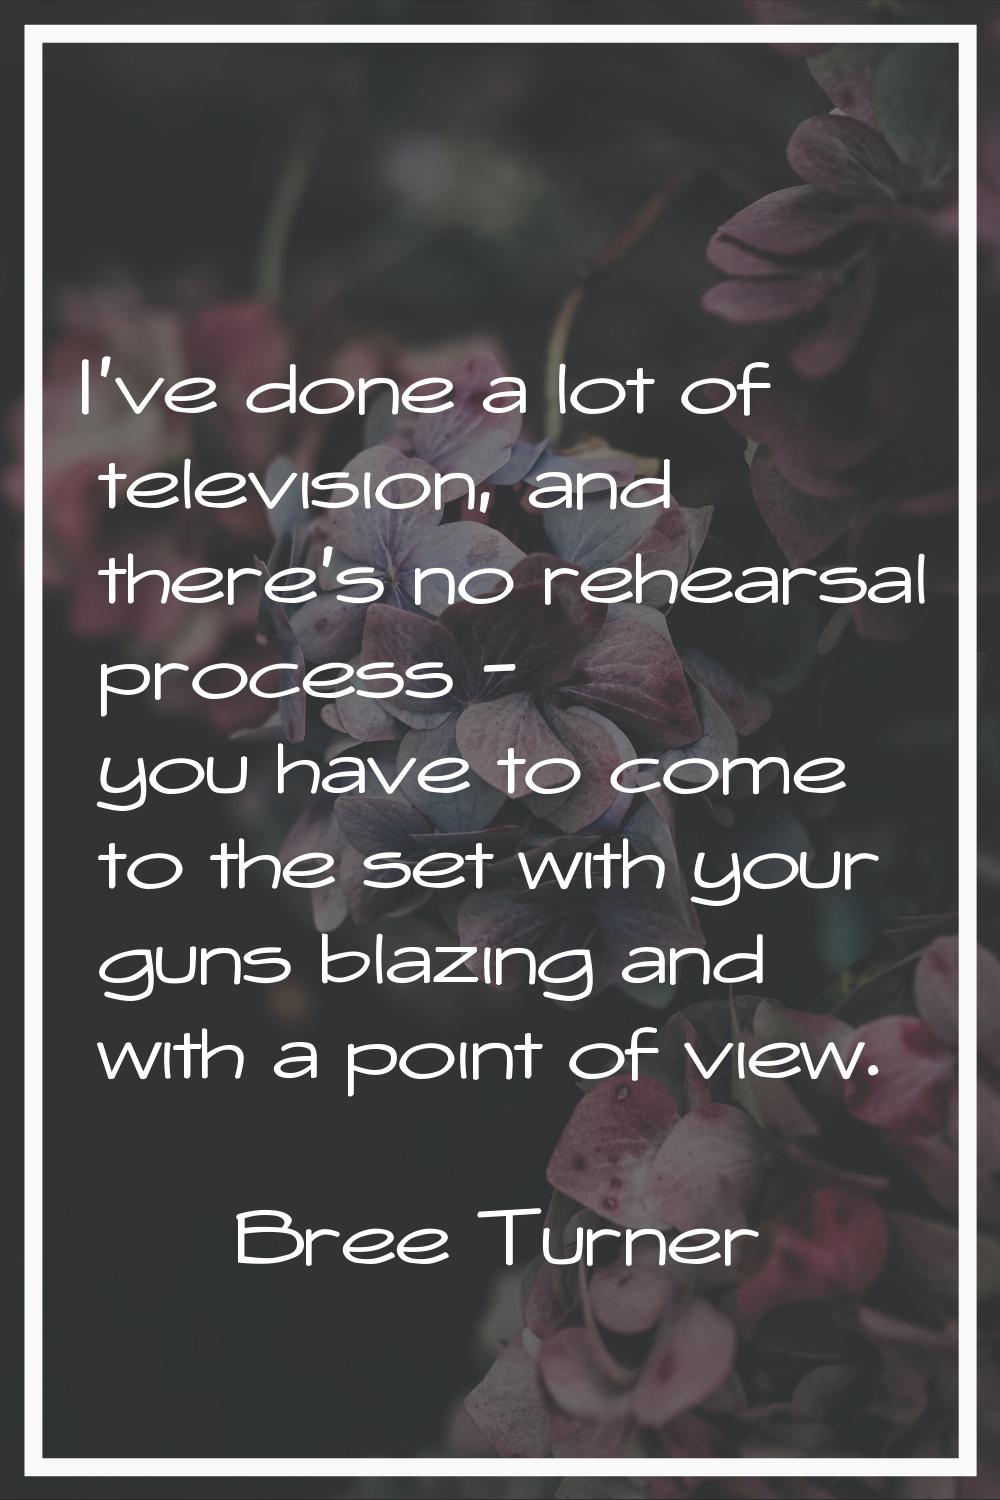 I've done a lot of television, and there's no rehearsal process - you have to come to the set with 